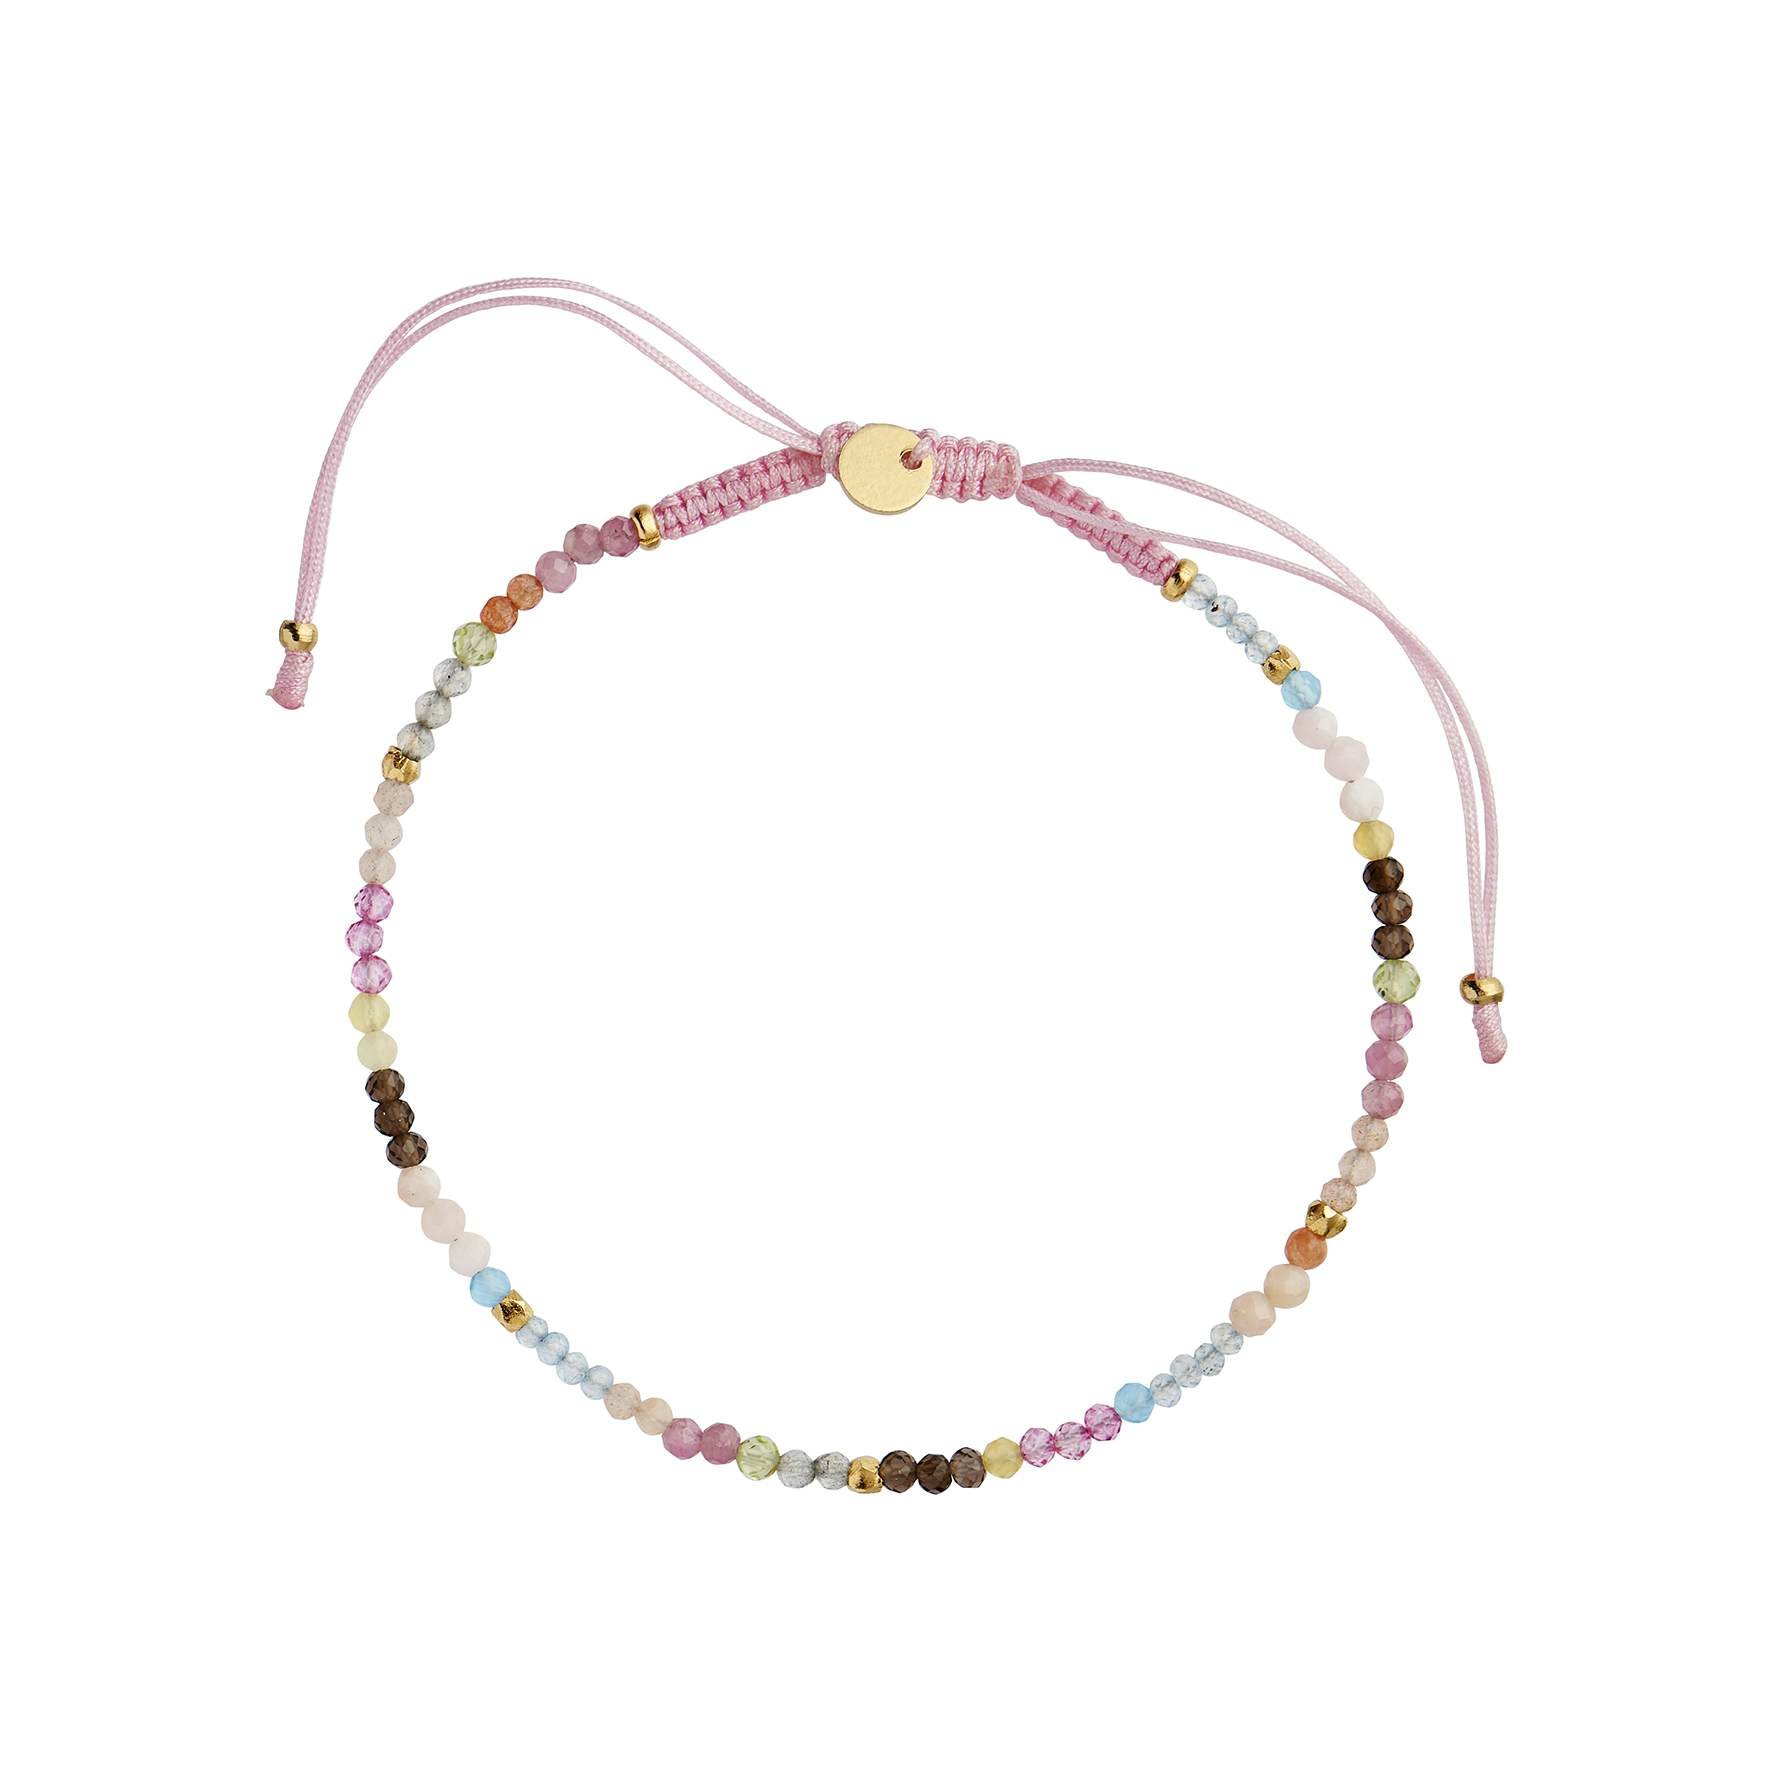 Candyfloss Rainbow Bracelet Mix With Light Pink Ribbon from STINE A Jewelry in Nylon